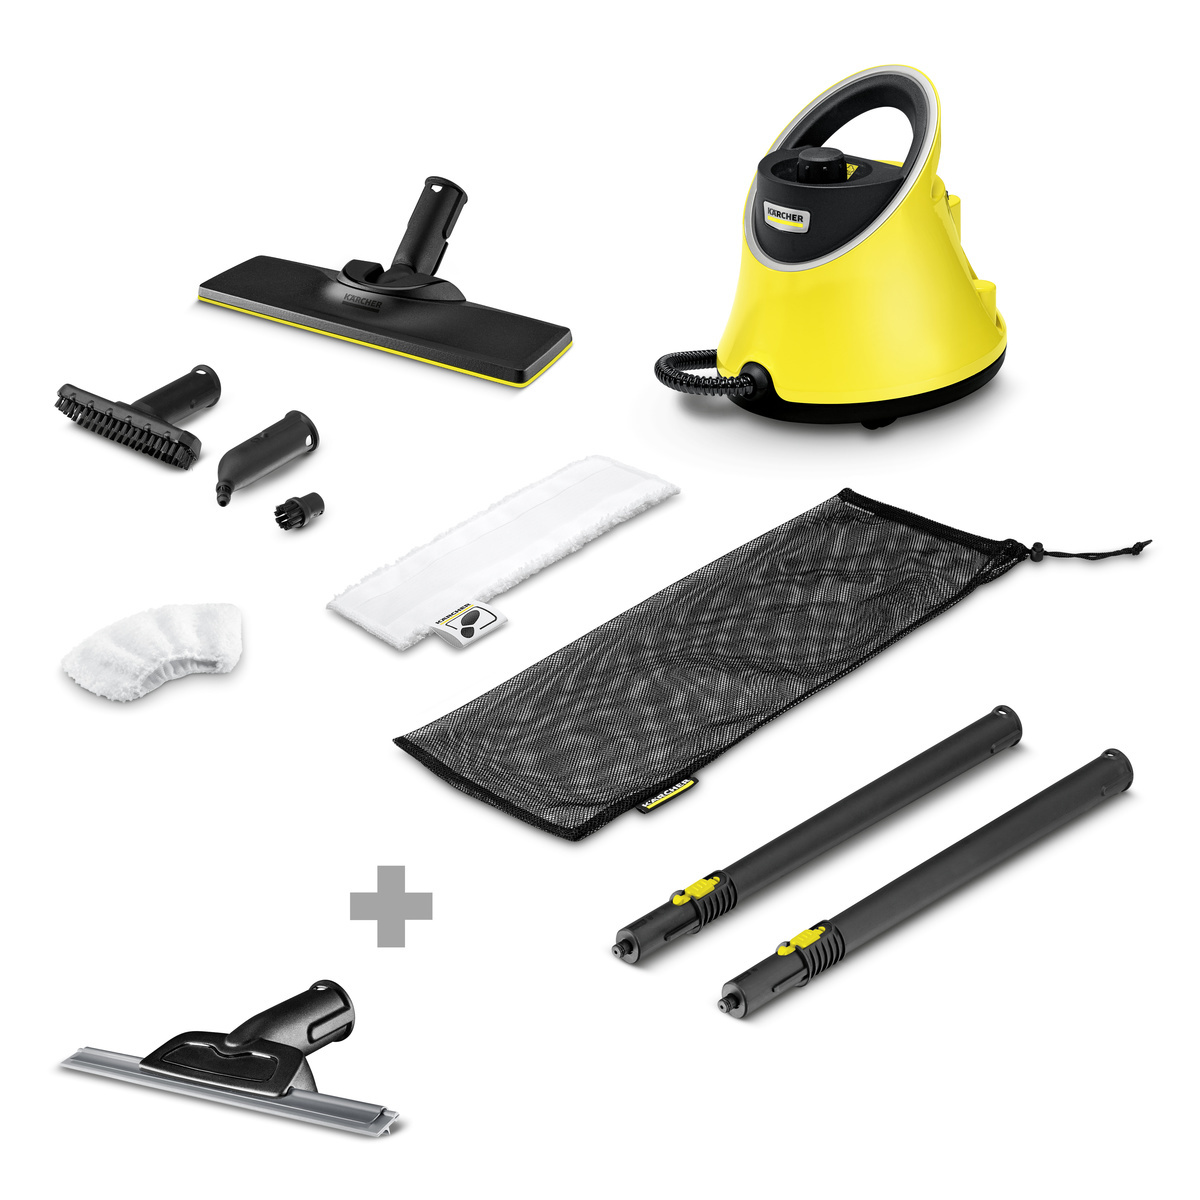 KARCHER SC 2 DELUXE EF LIMITED EDITION